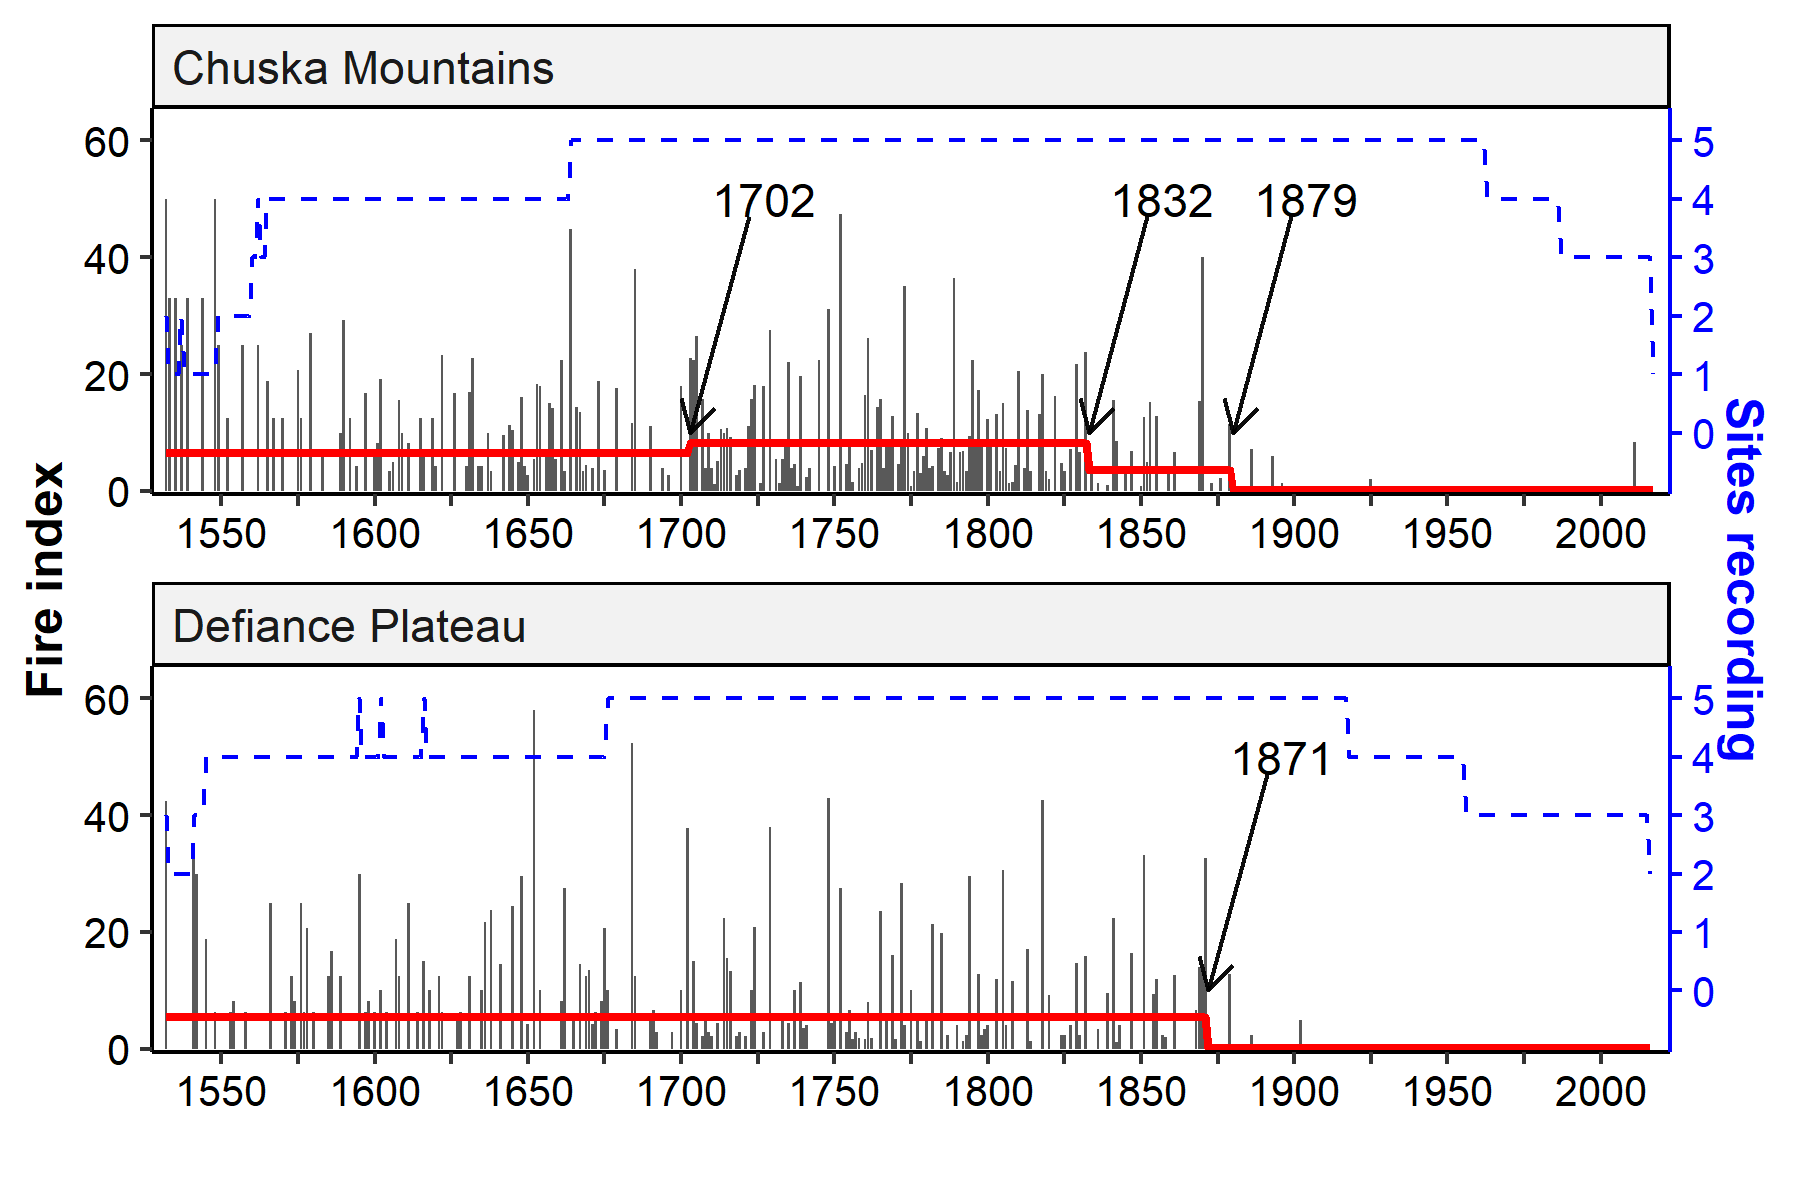 Historical fire activity in the Chuska Mountains and Defiance Plateau. Arrows indicate changes in the average fire extent (quantified as fire index - the percent of trees and sites recording fire).